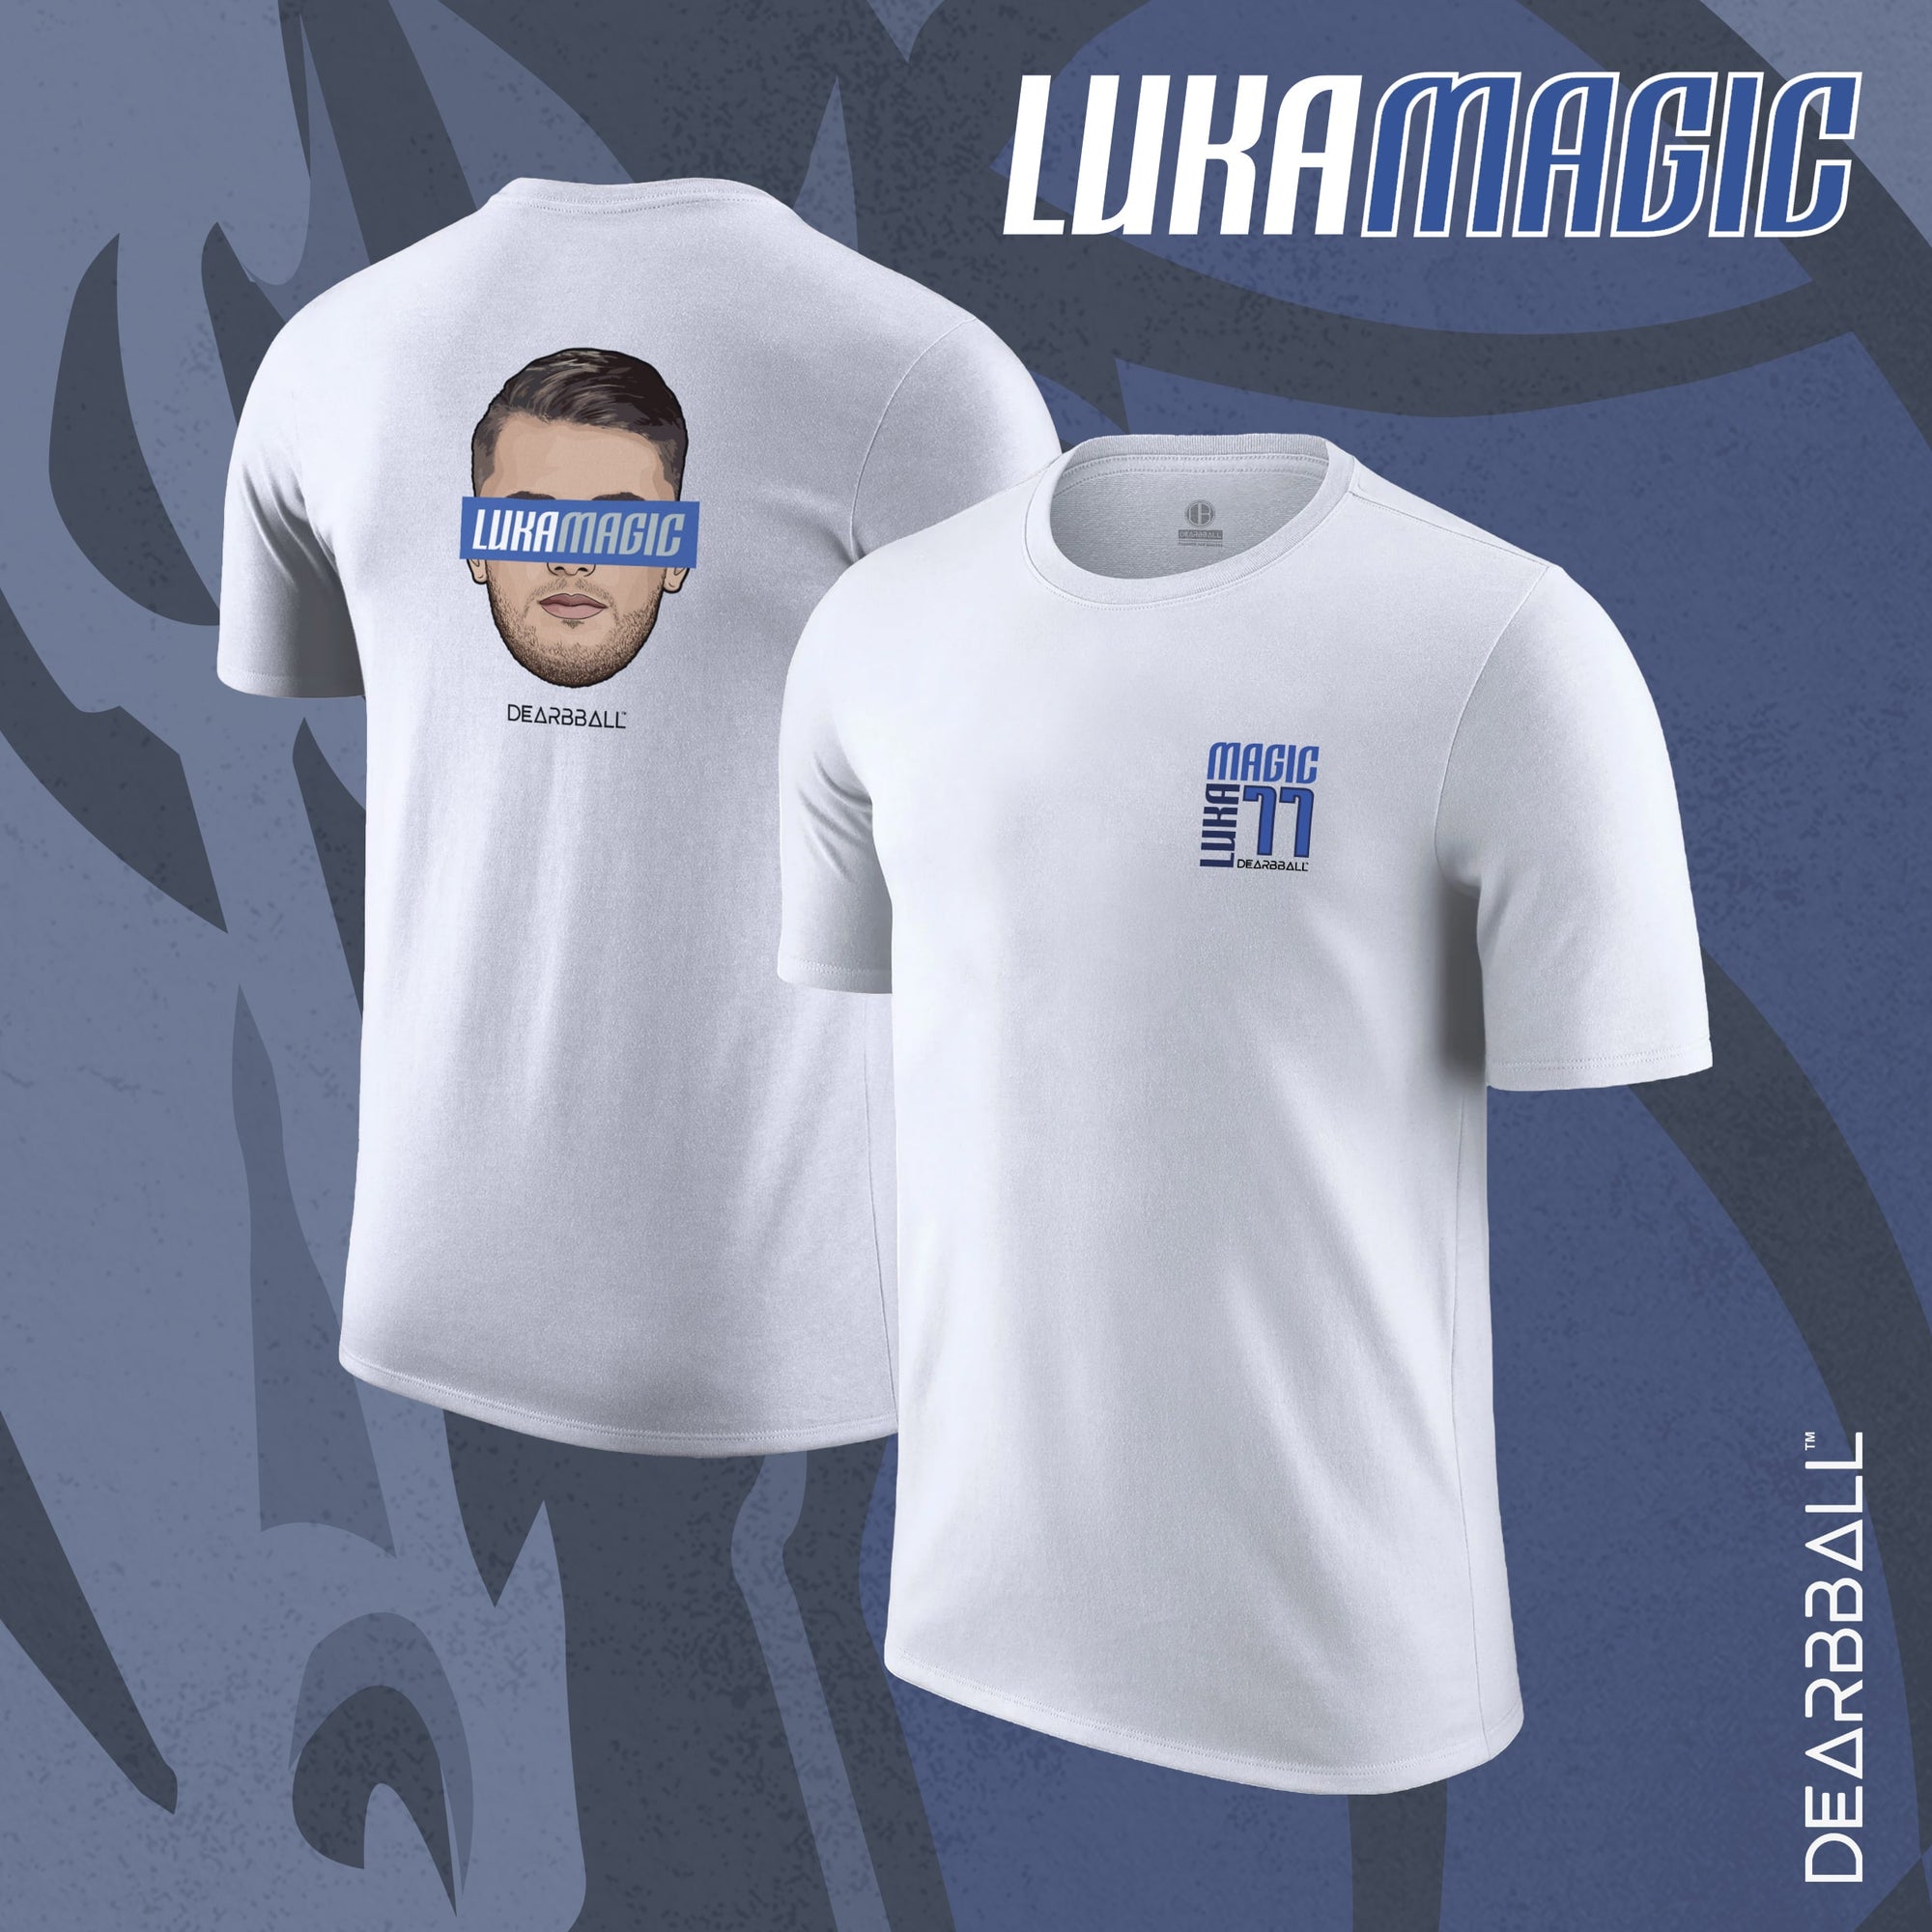 DearBBall T-Shirt - LukaMagic Embroidered Patch Premium Edition